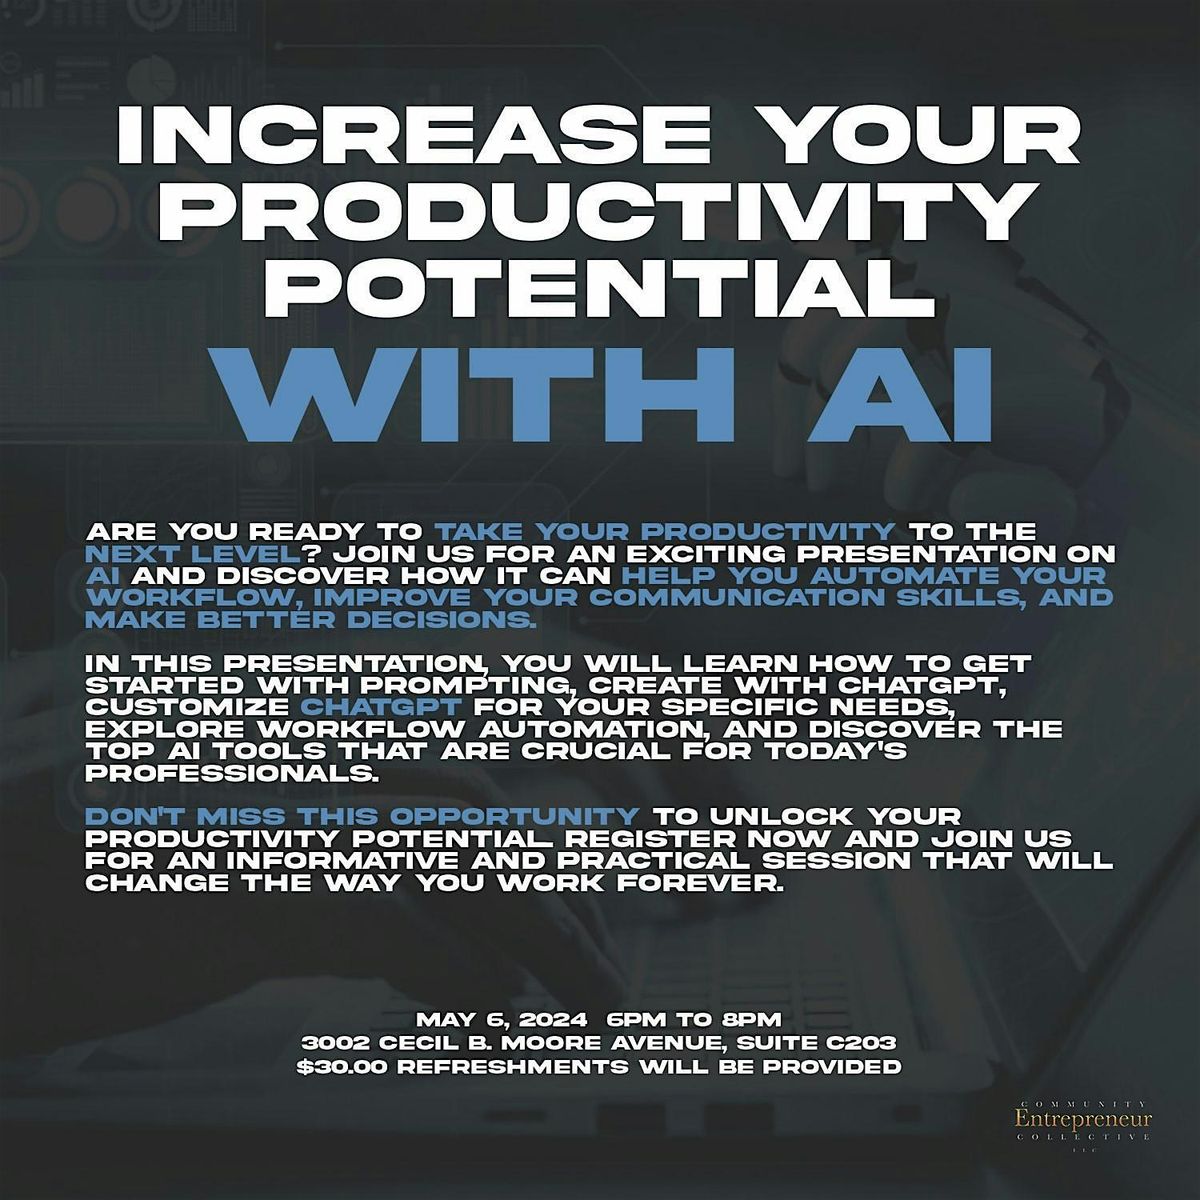 Increase Your Productivity Potential With AI